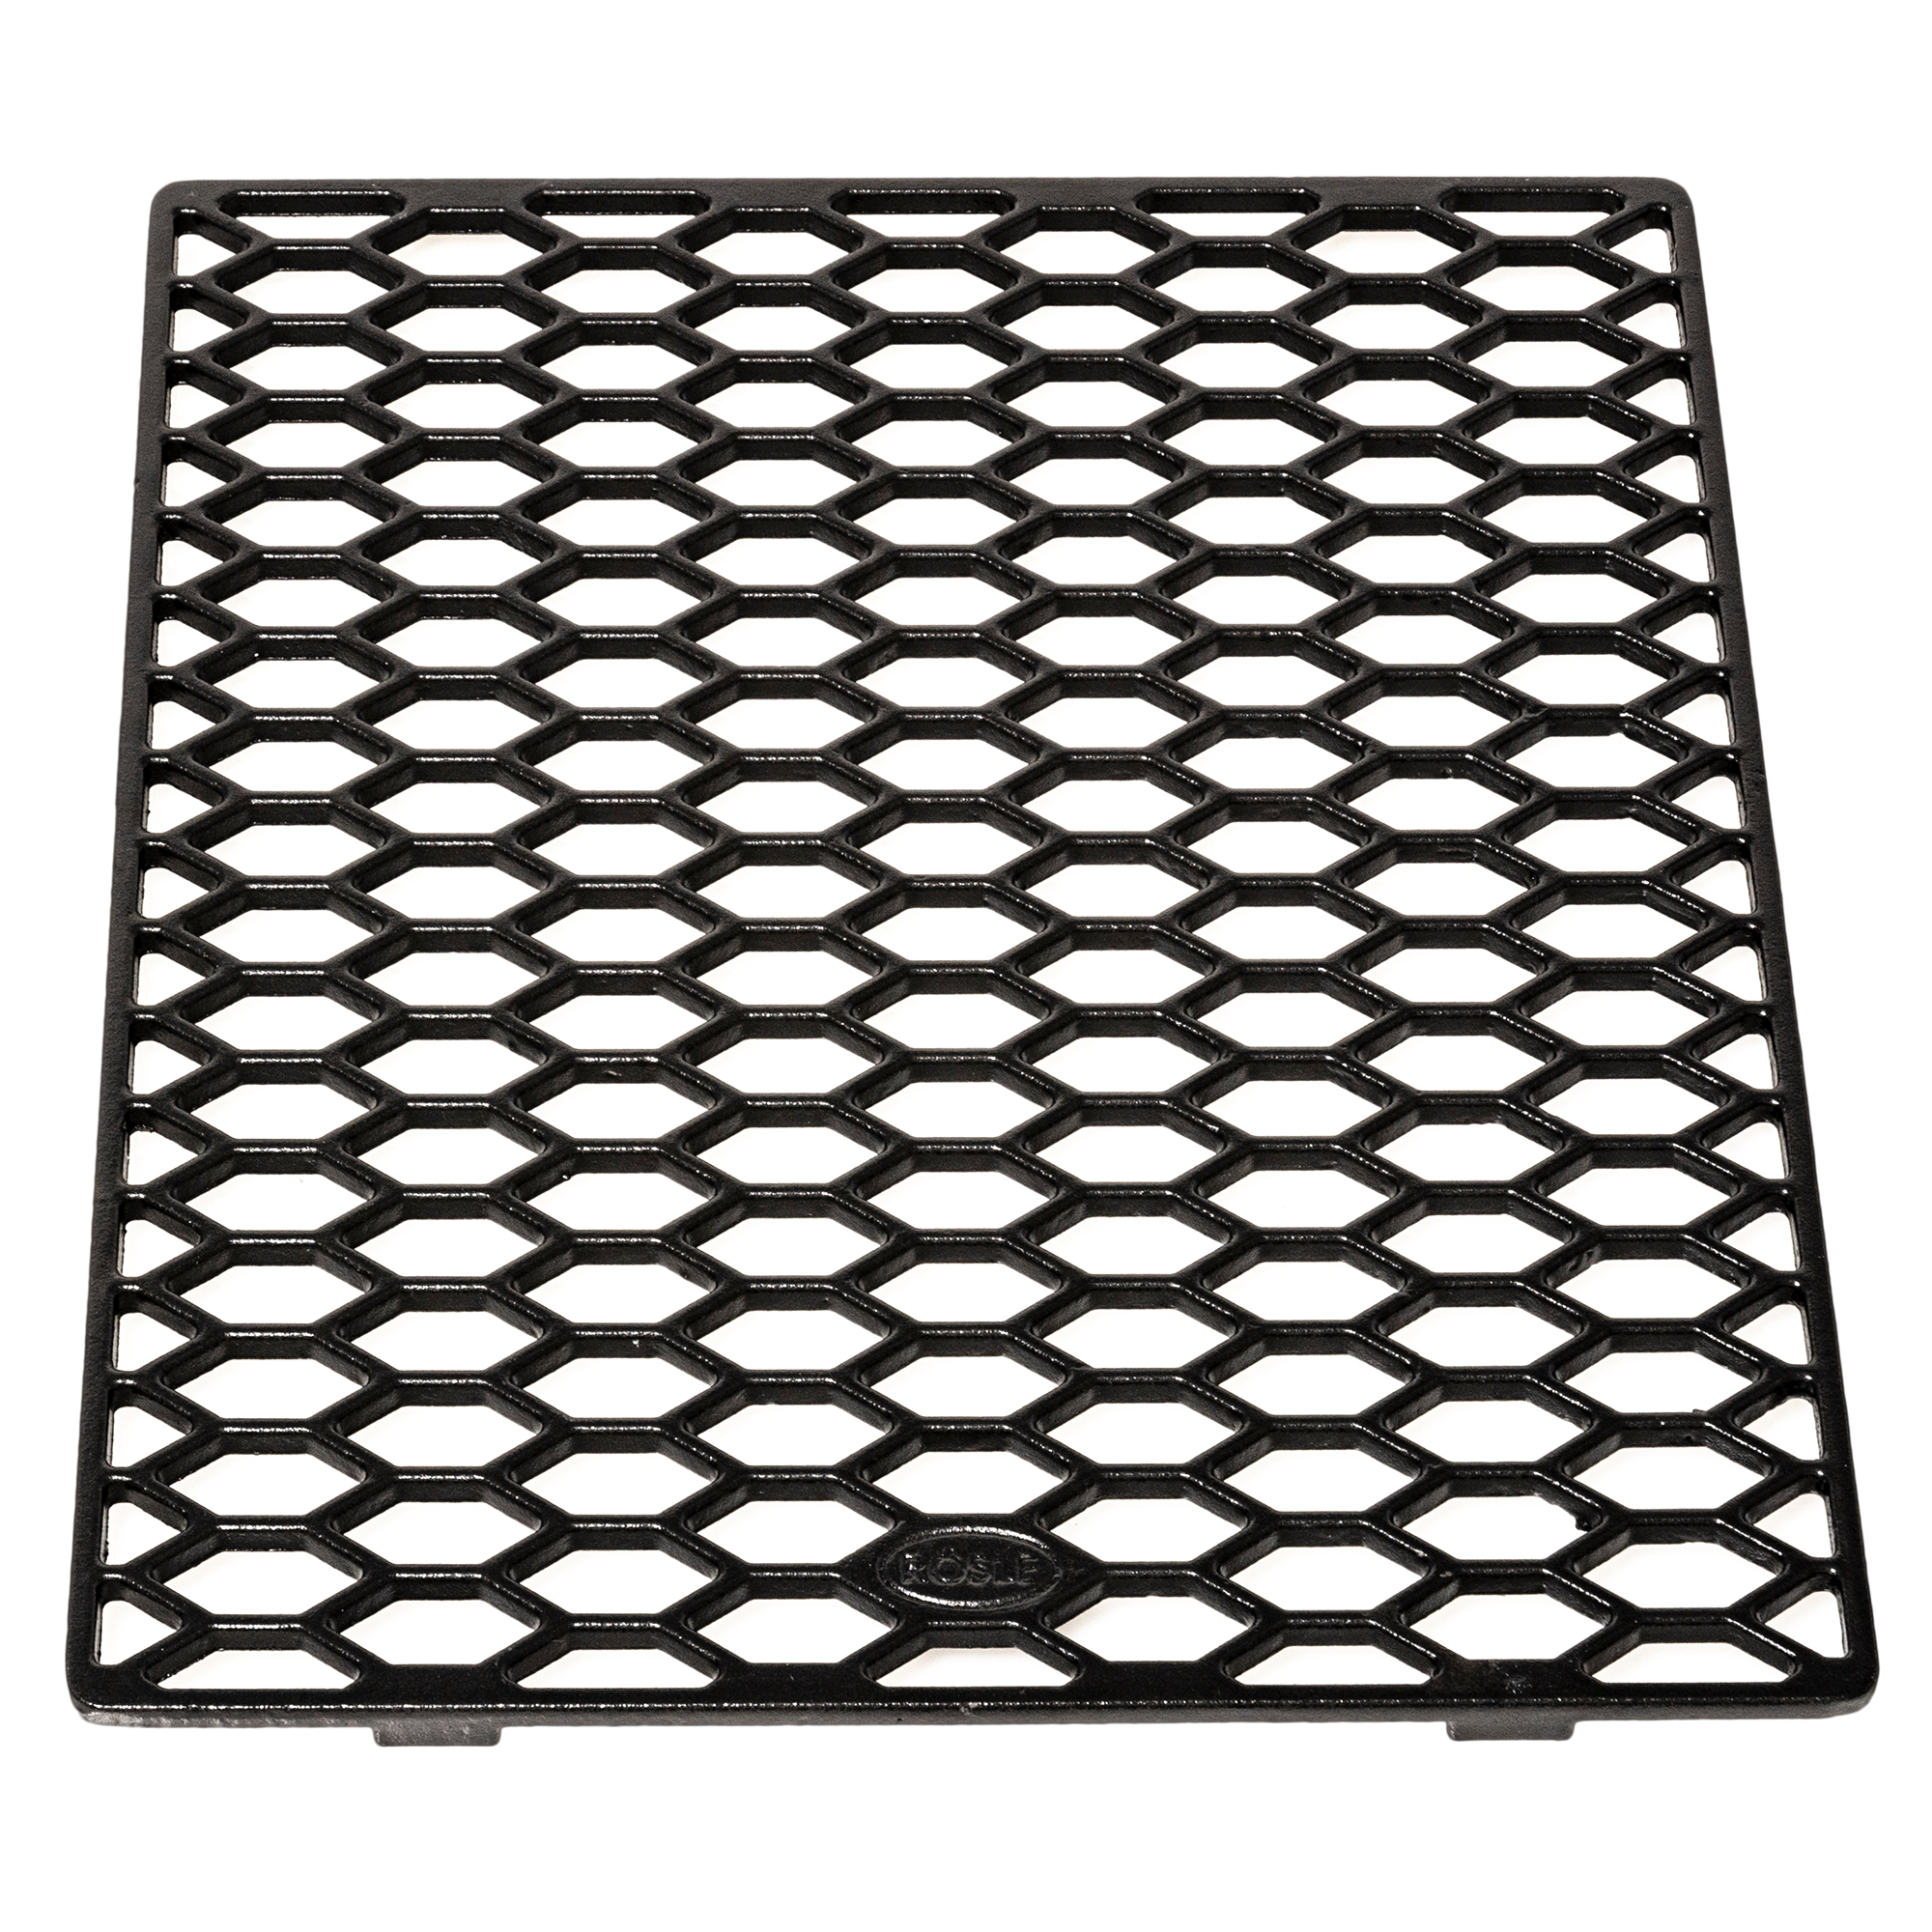 Cast iron grilling grate (Vision G4)